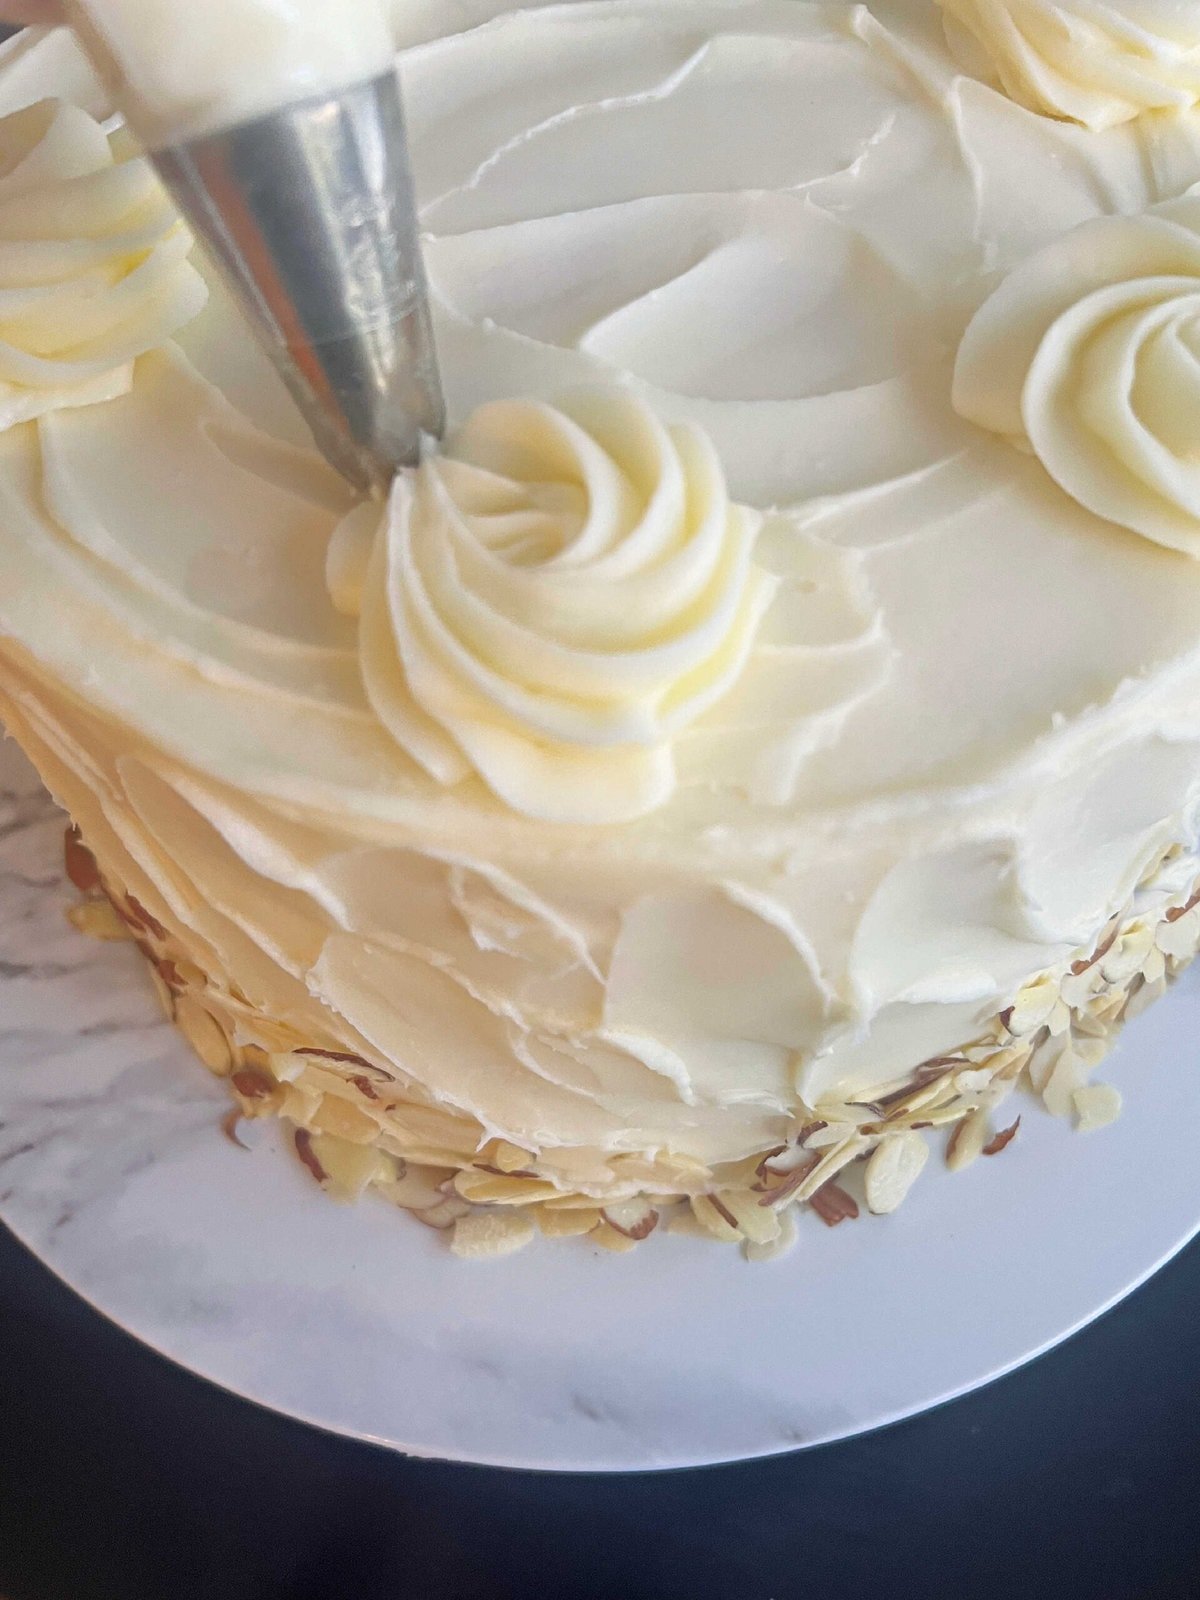 Piping swirls of frosting on top of the cake using a large 2D star tip.